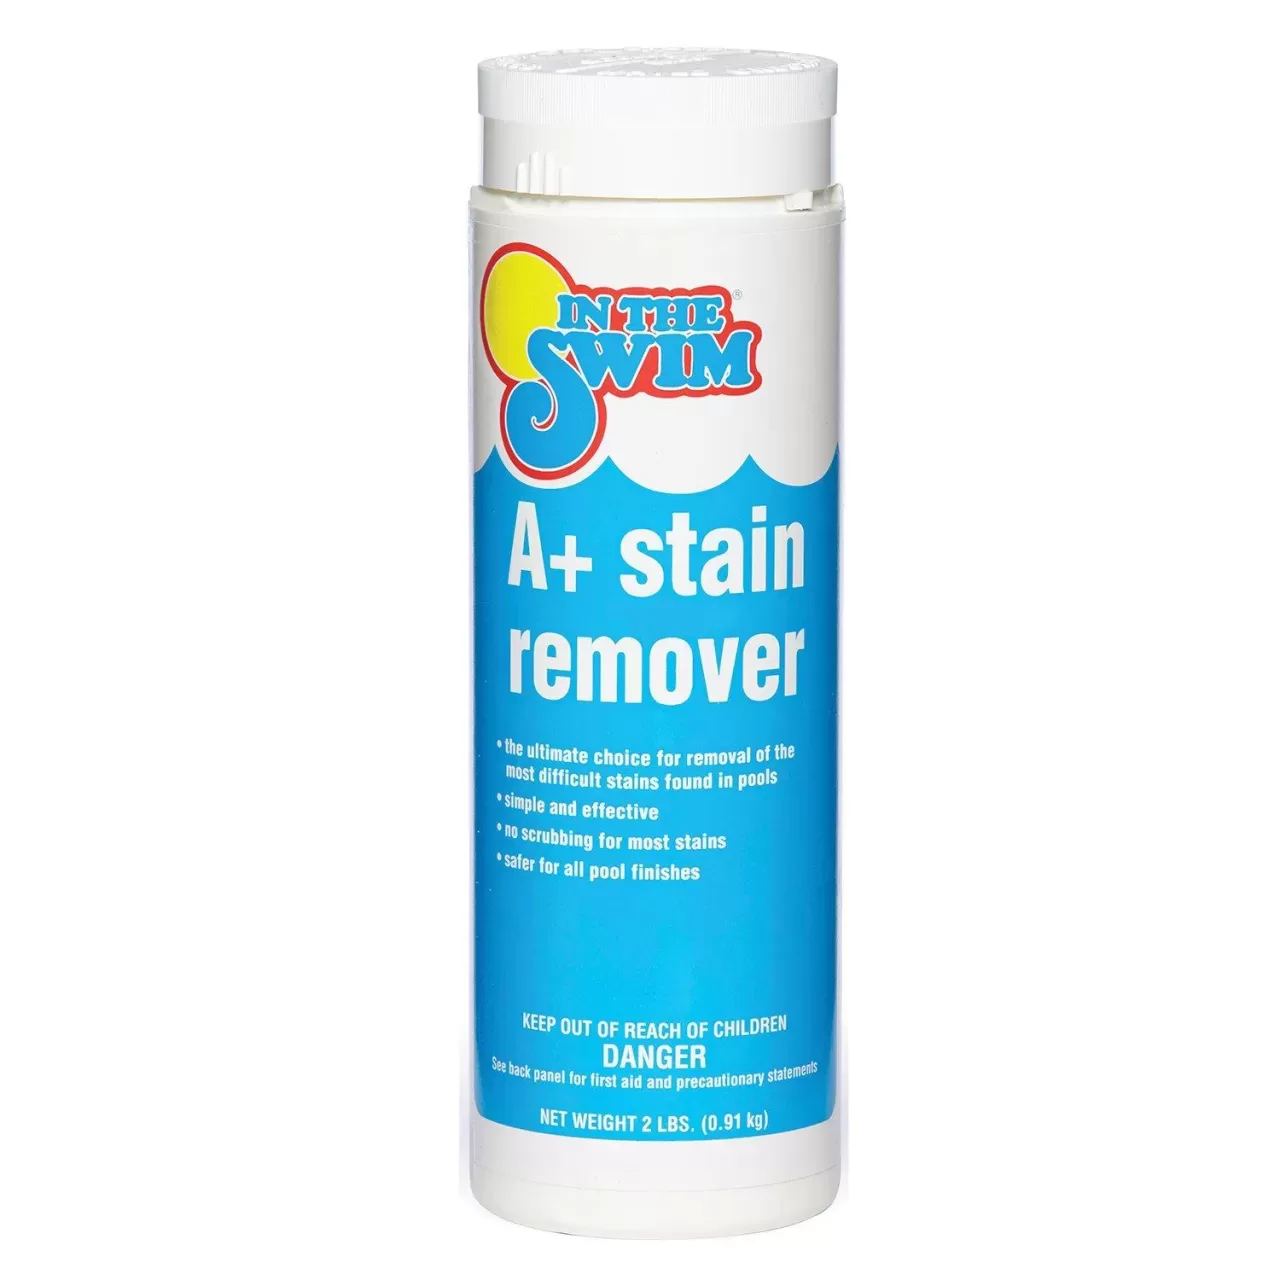 a+ stain remover